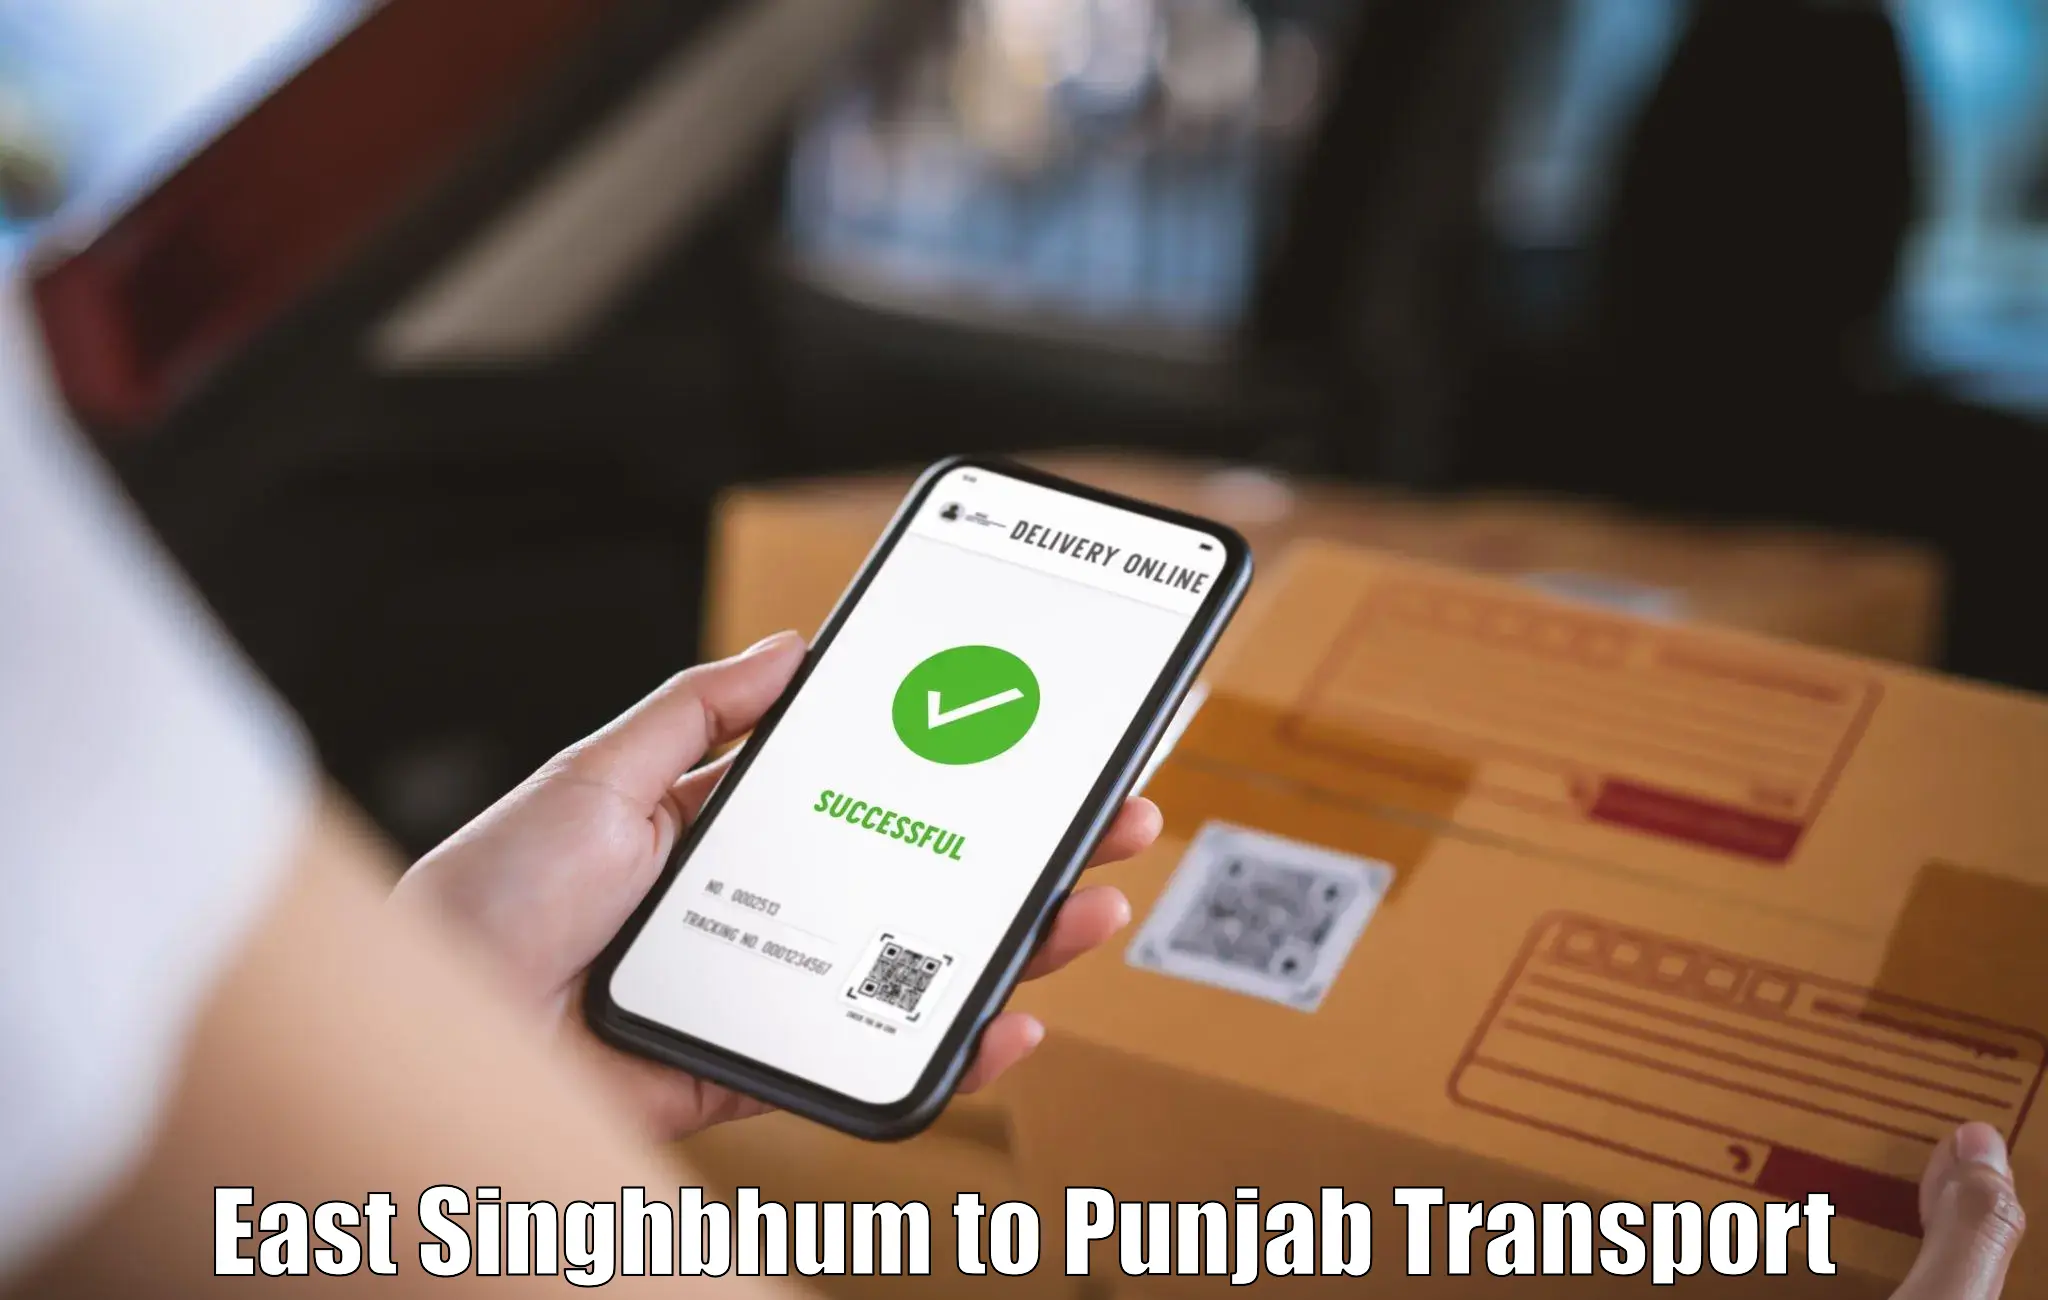 Road transport online services East Singhbhum to Sultanpur Lodhi